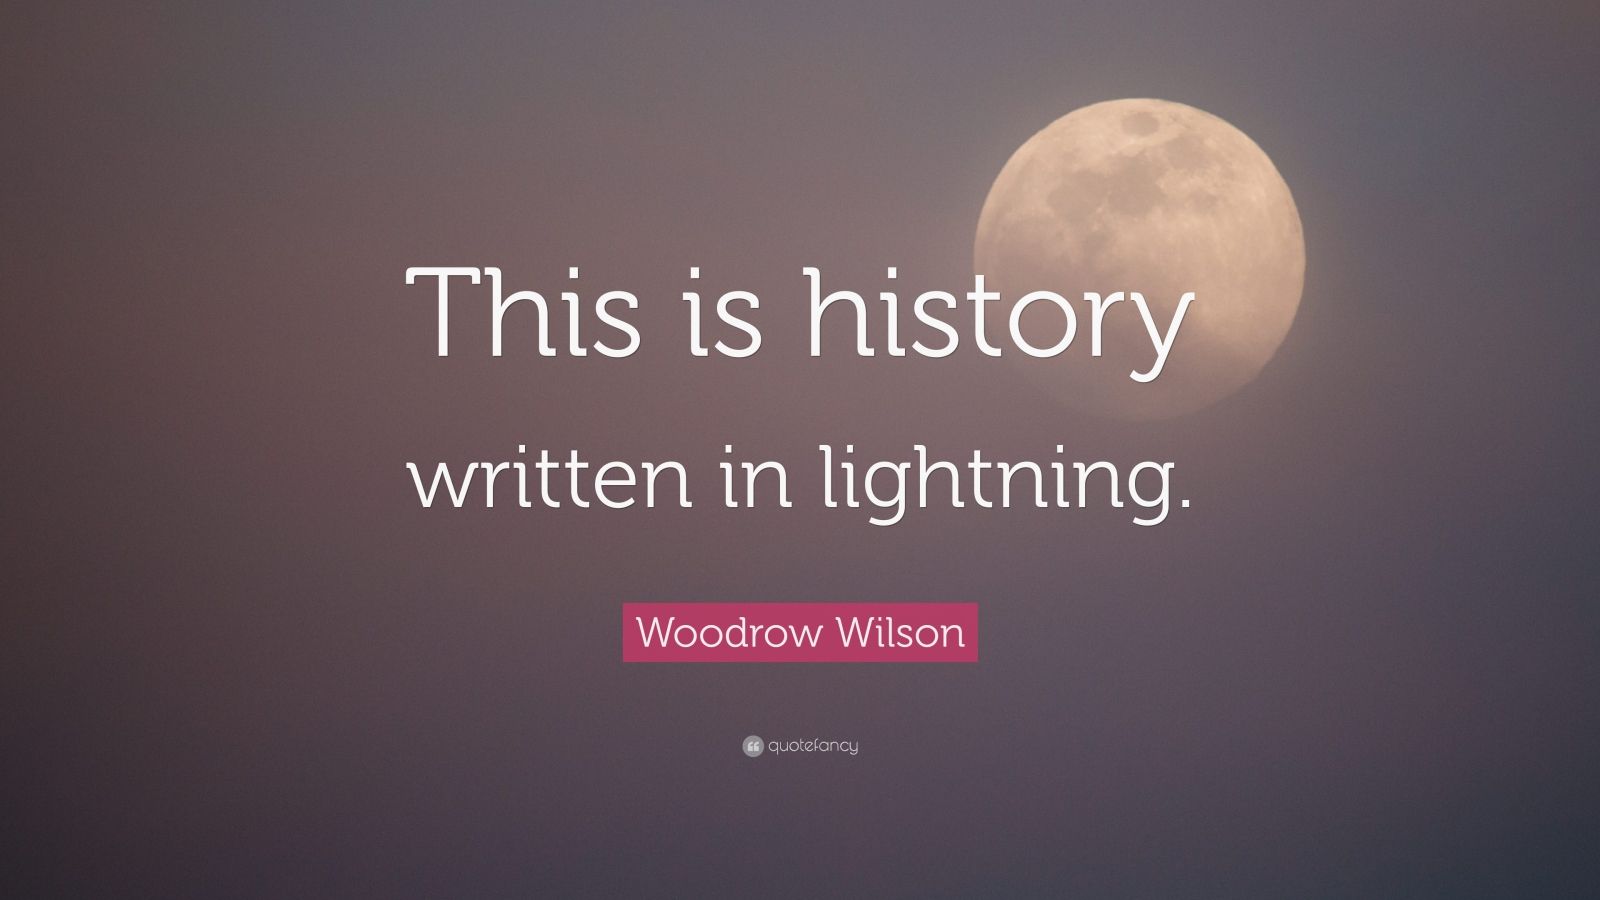 Woodrow Wilson Quote: “This is history written in lightning.”